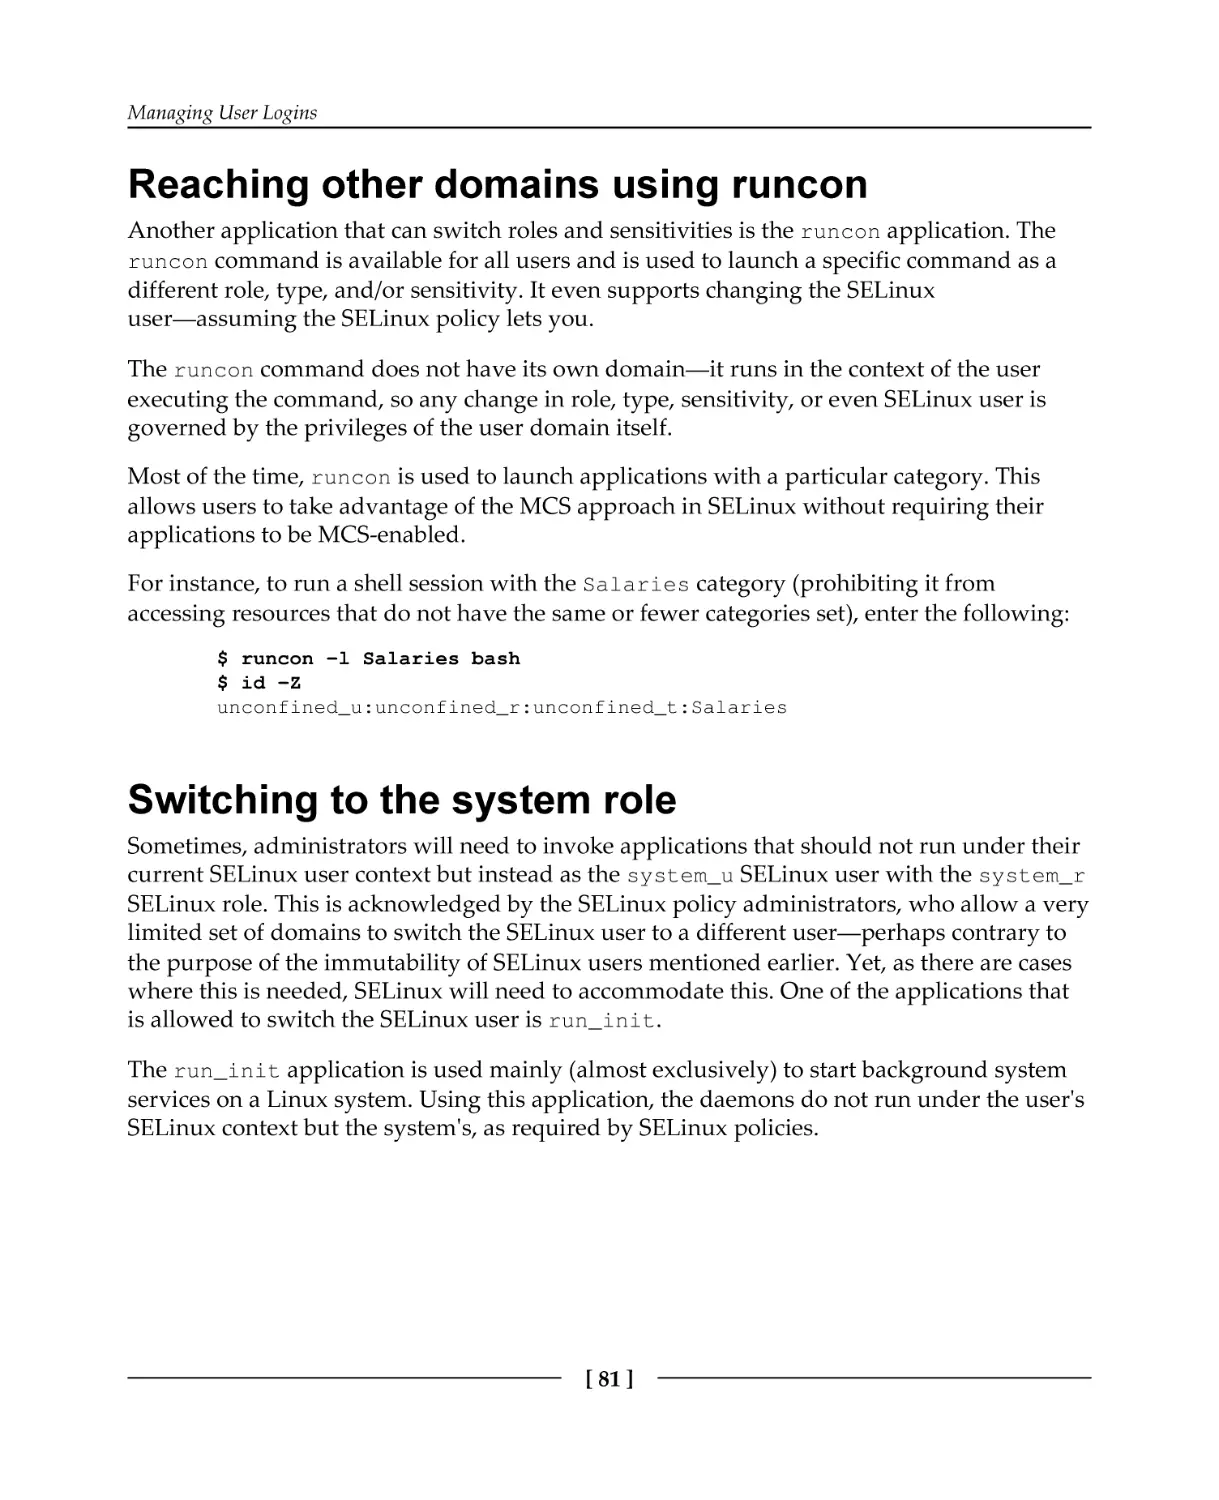 Reaching other domains using runcon
Switching to the system role